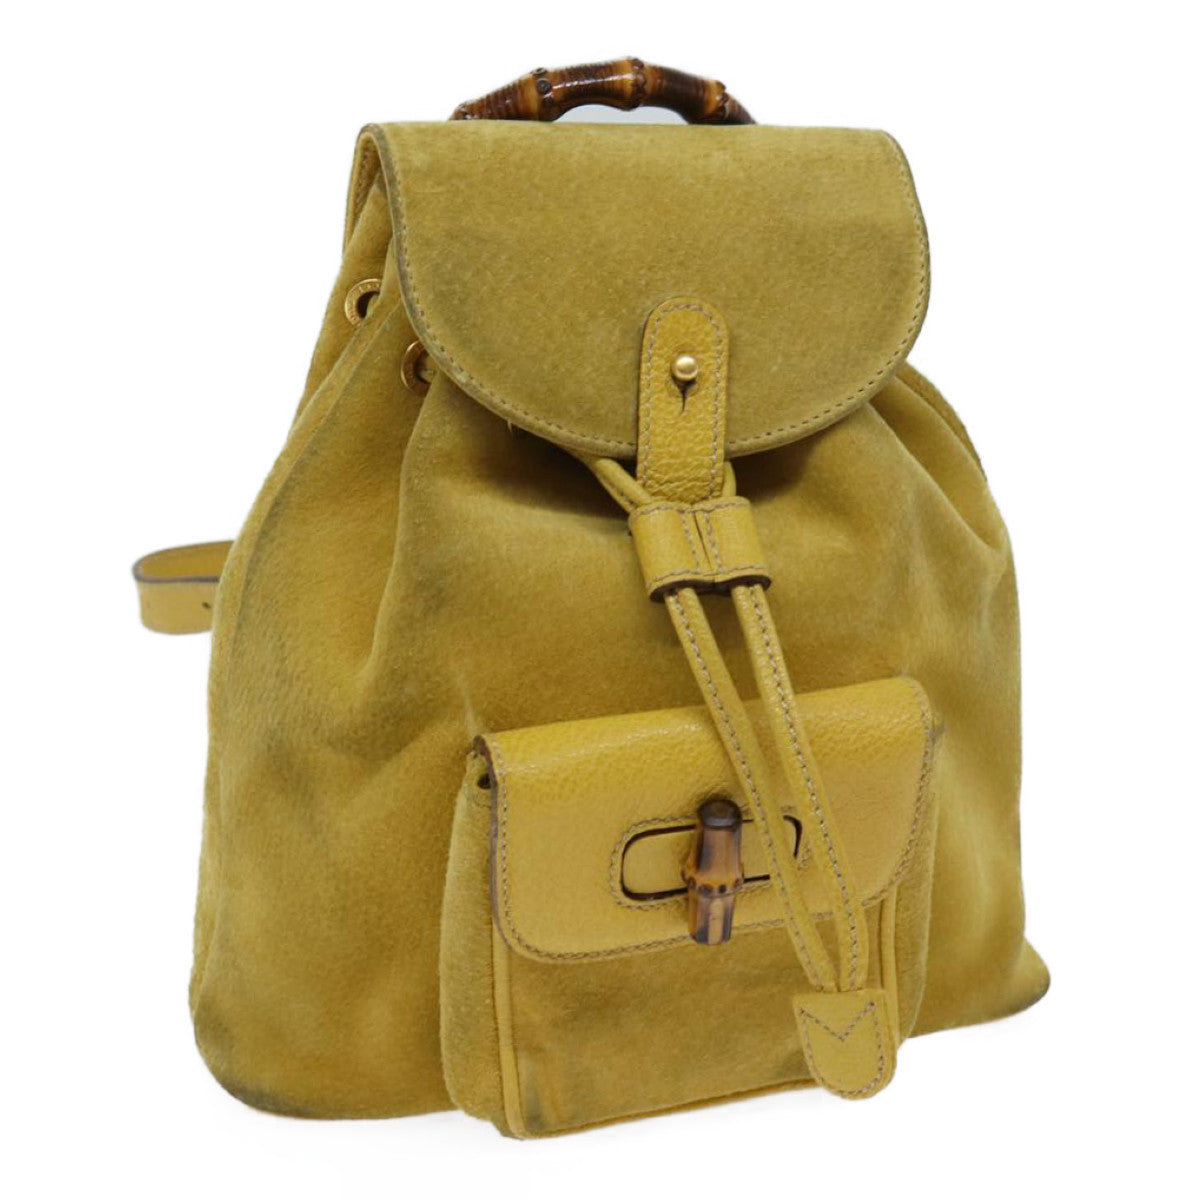 GUCCI Bamboo Backpack Suede Leather Yellow 003 1705 0030 Auth 69737